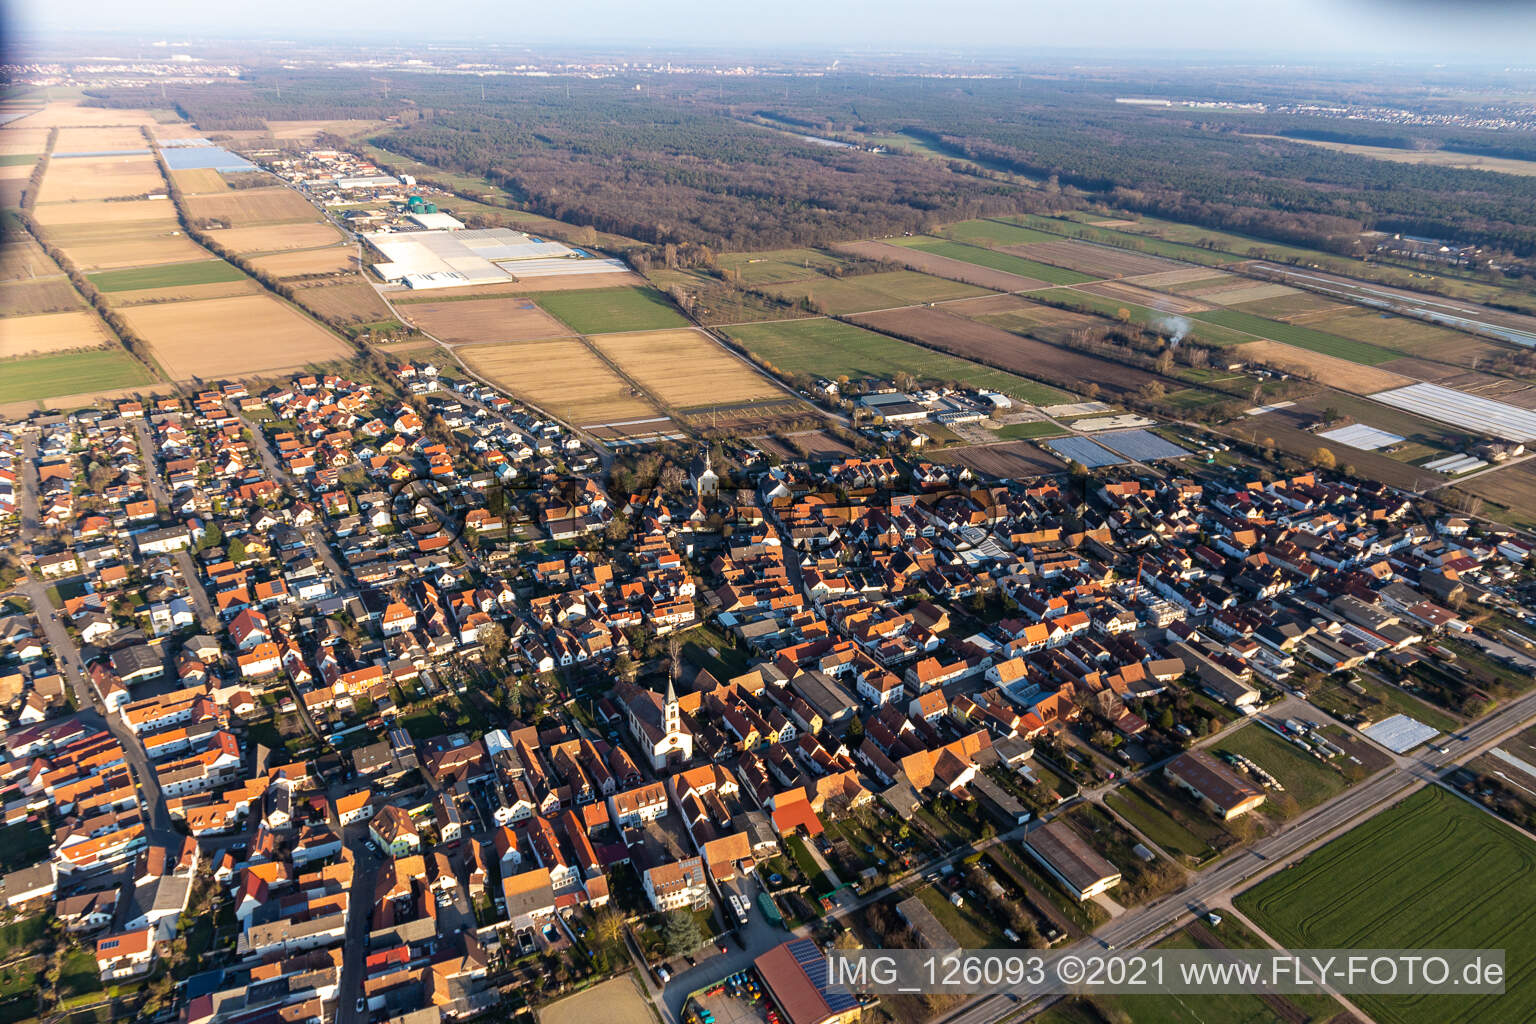 Zeiskam in the state Rhineland-Palatinate, Germany seen from above